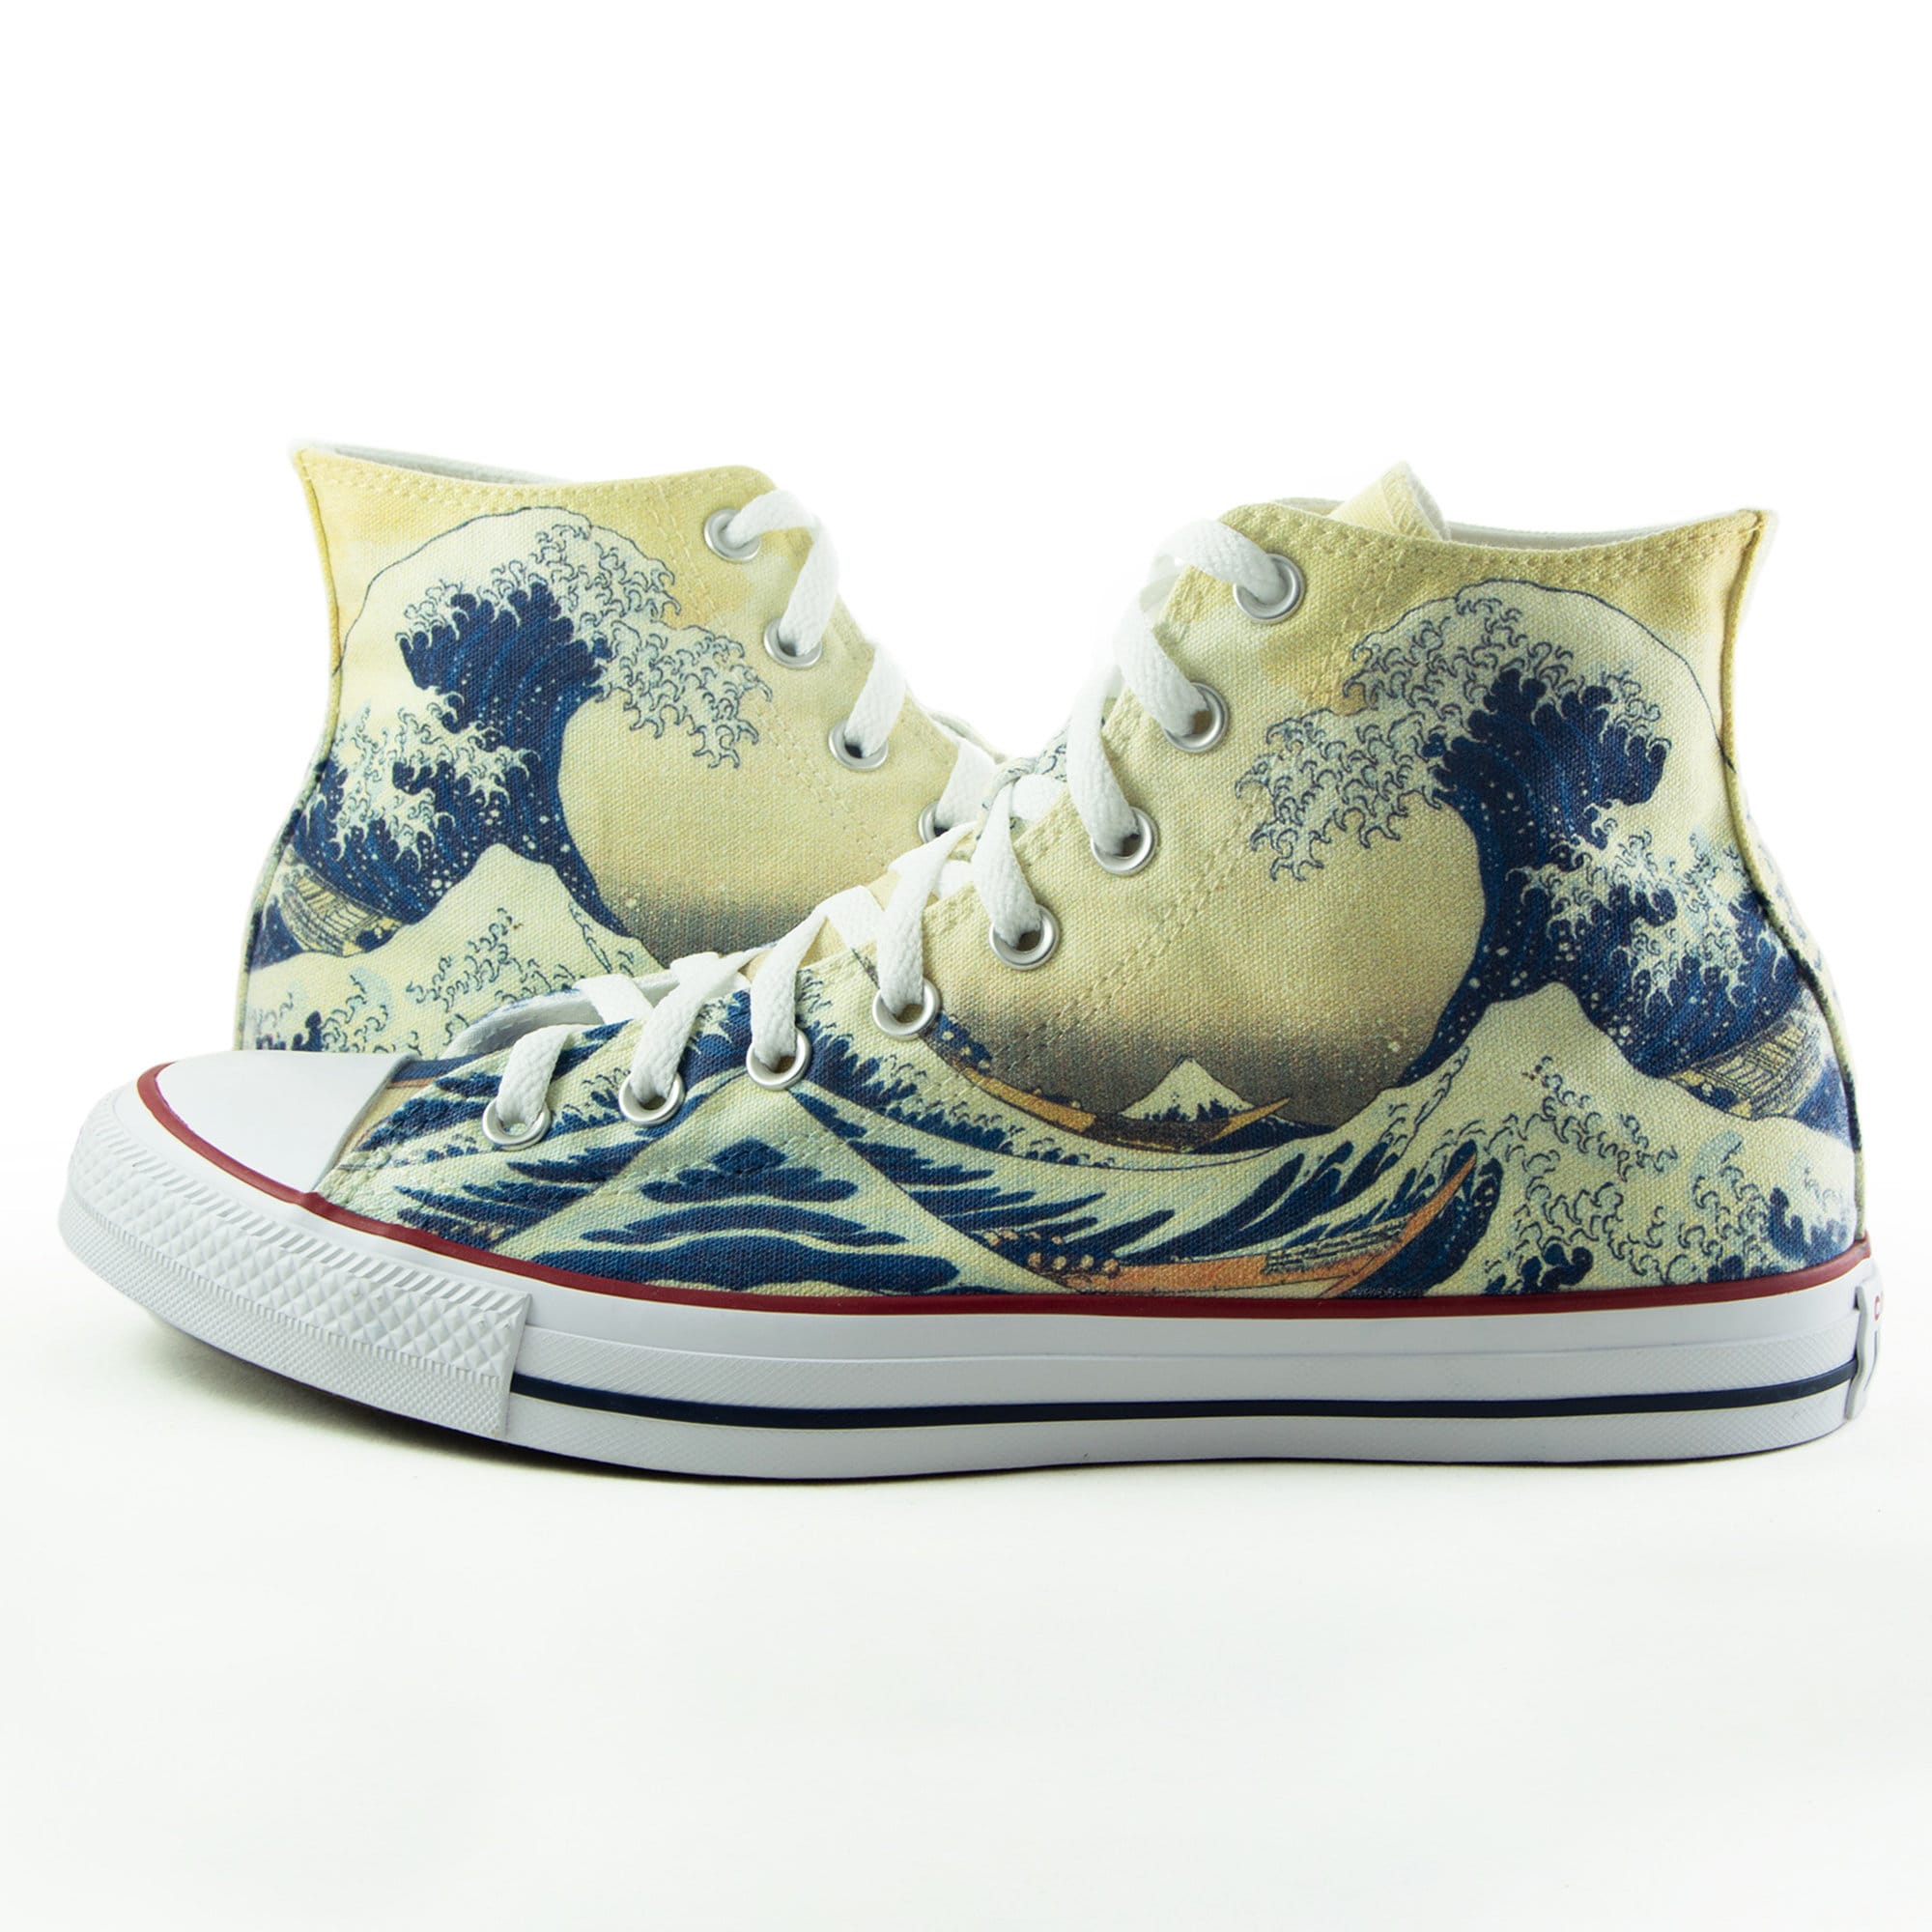 The Great Wave Off Kanagawa vintage Sunset Japanese Mens High-top Sneakers Chaussures Chaussures homme Baskets et chaussures de sport Baskets montantes 